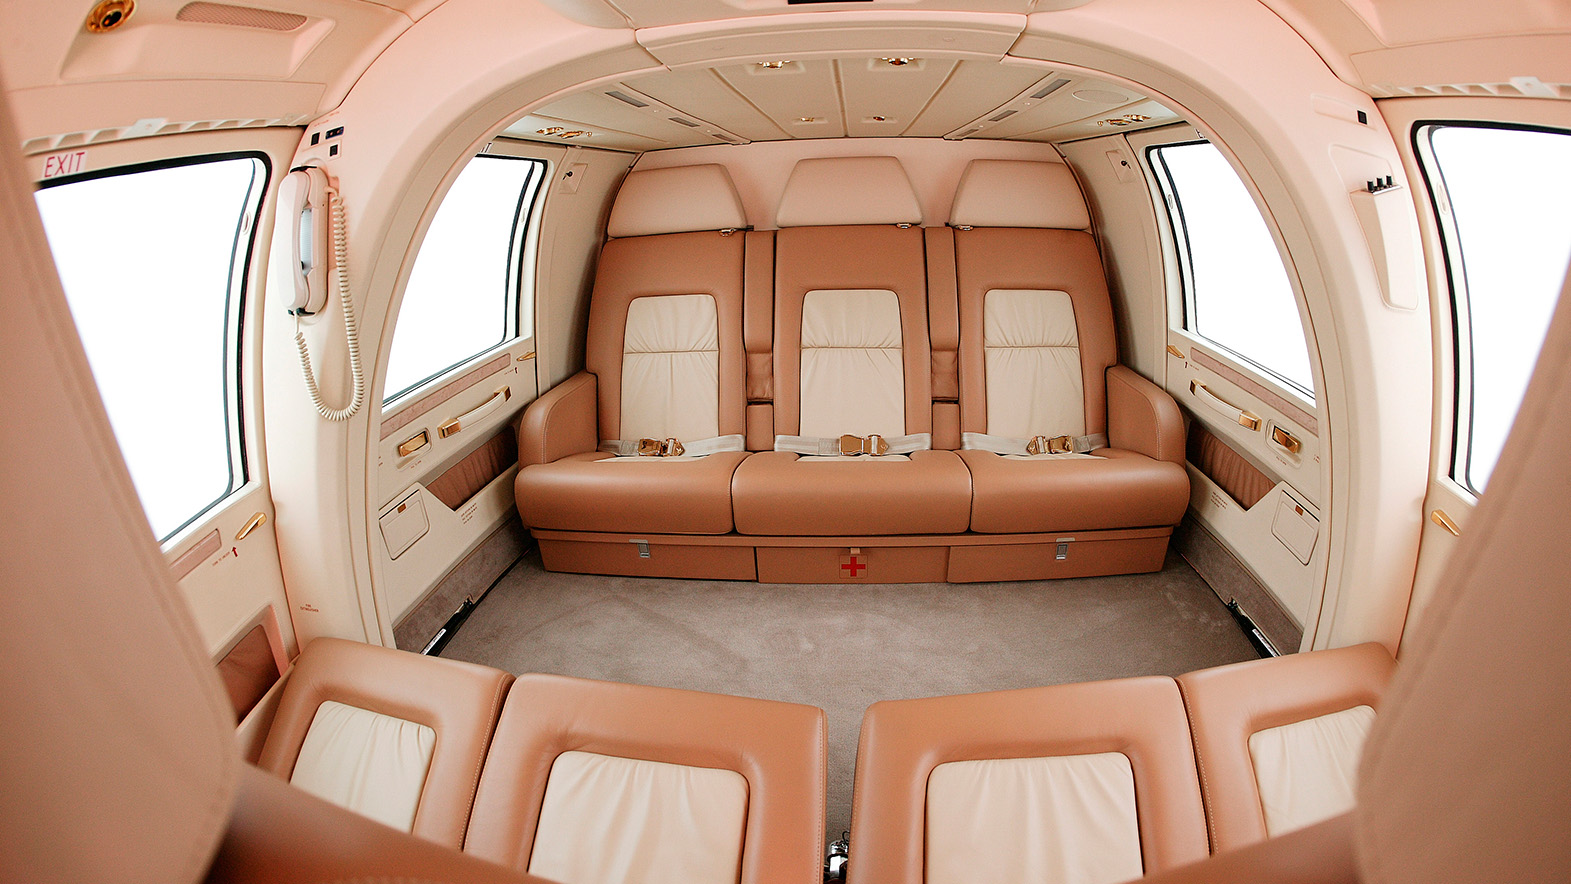 Interior of EUROCOPTER AS365 DAUPHIN